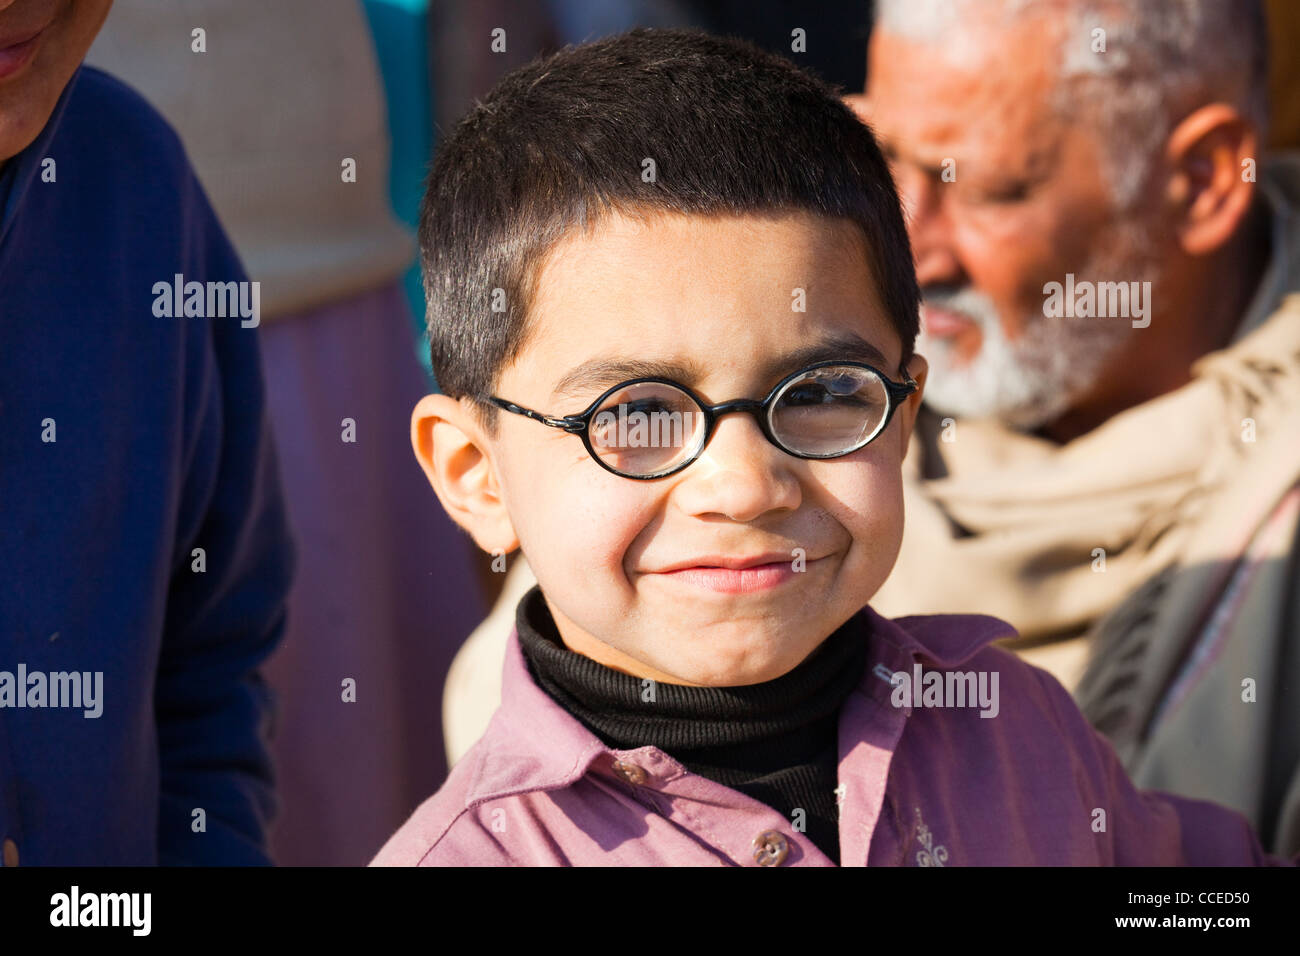 Young boy in Punjab Province, Pakistan Stock Photo